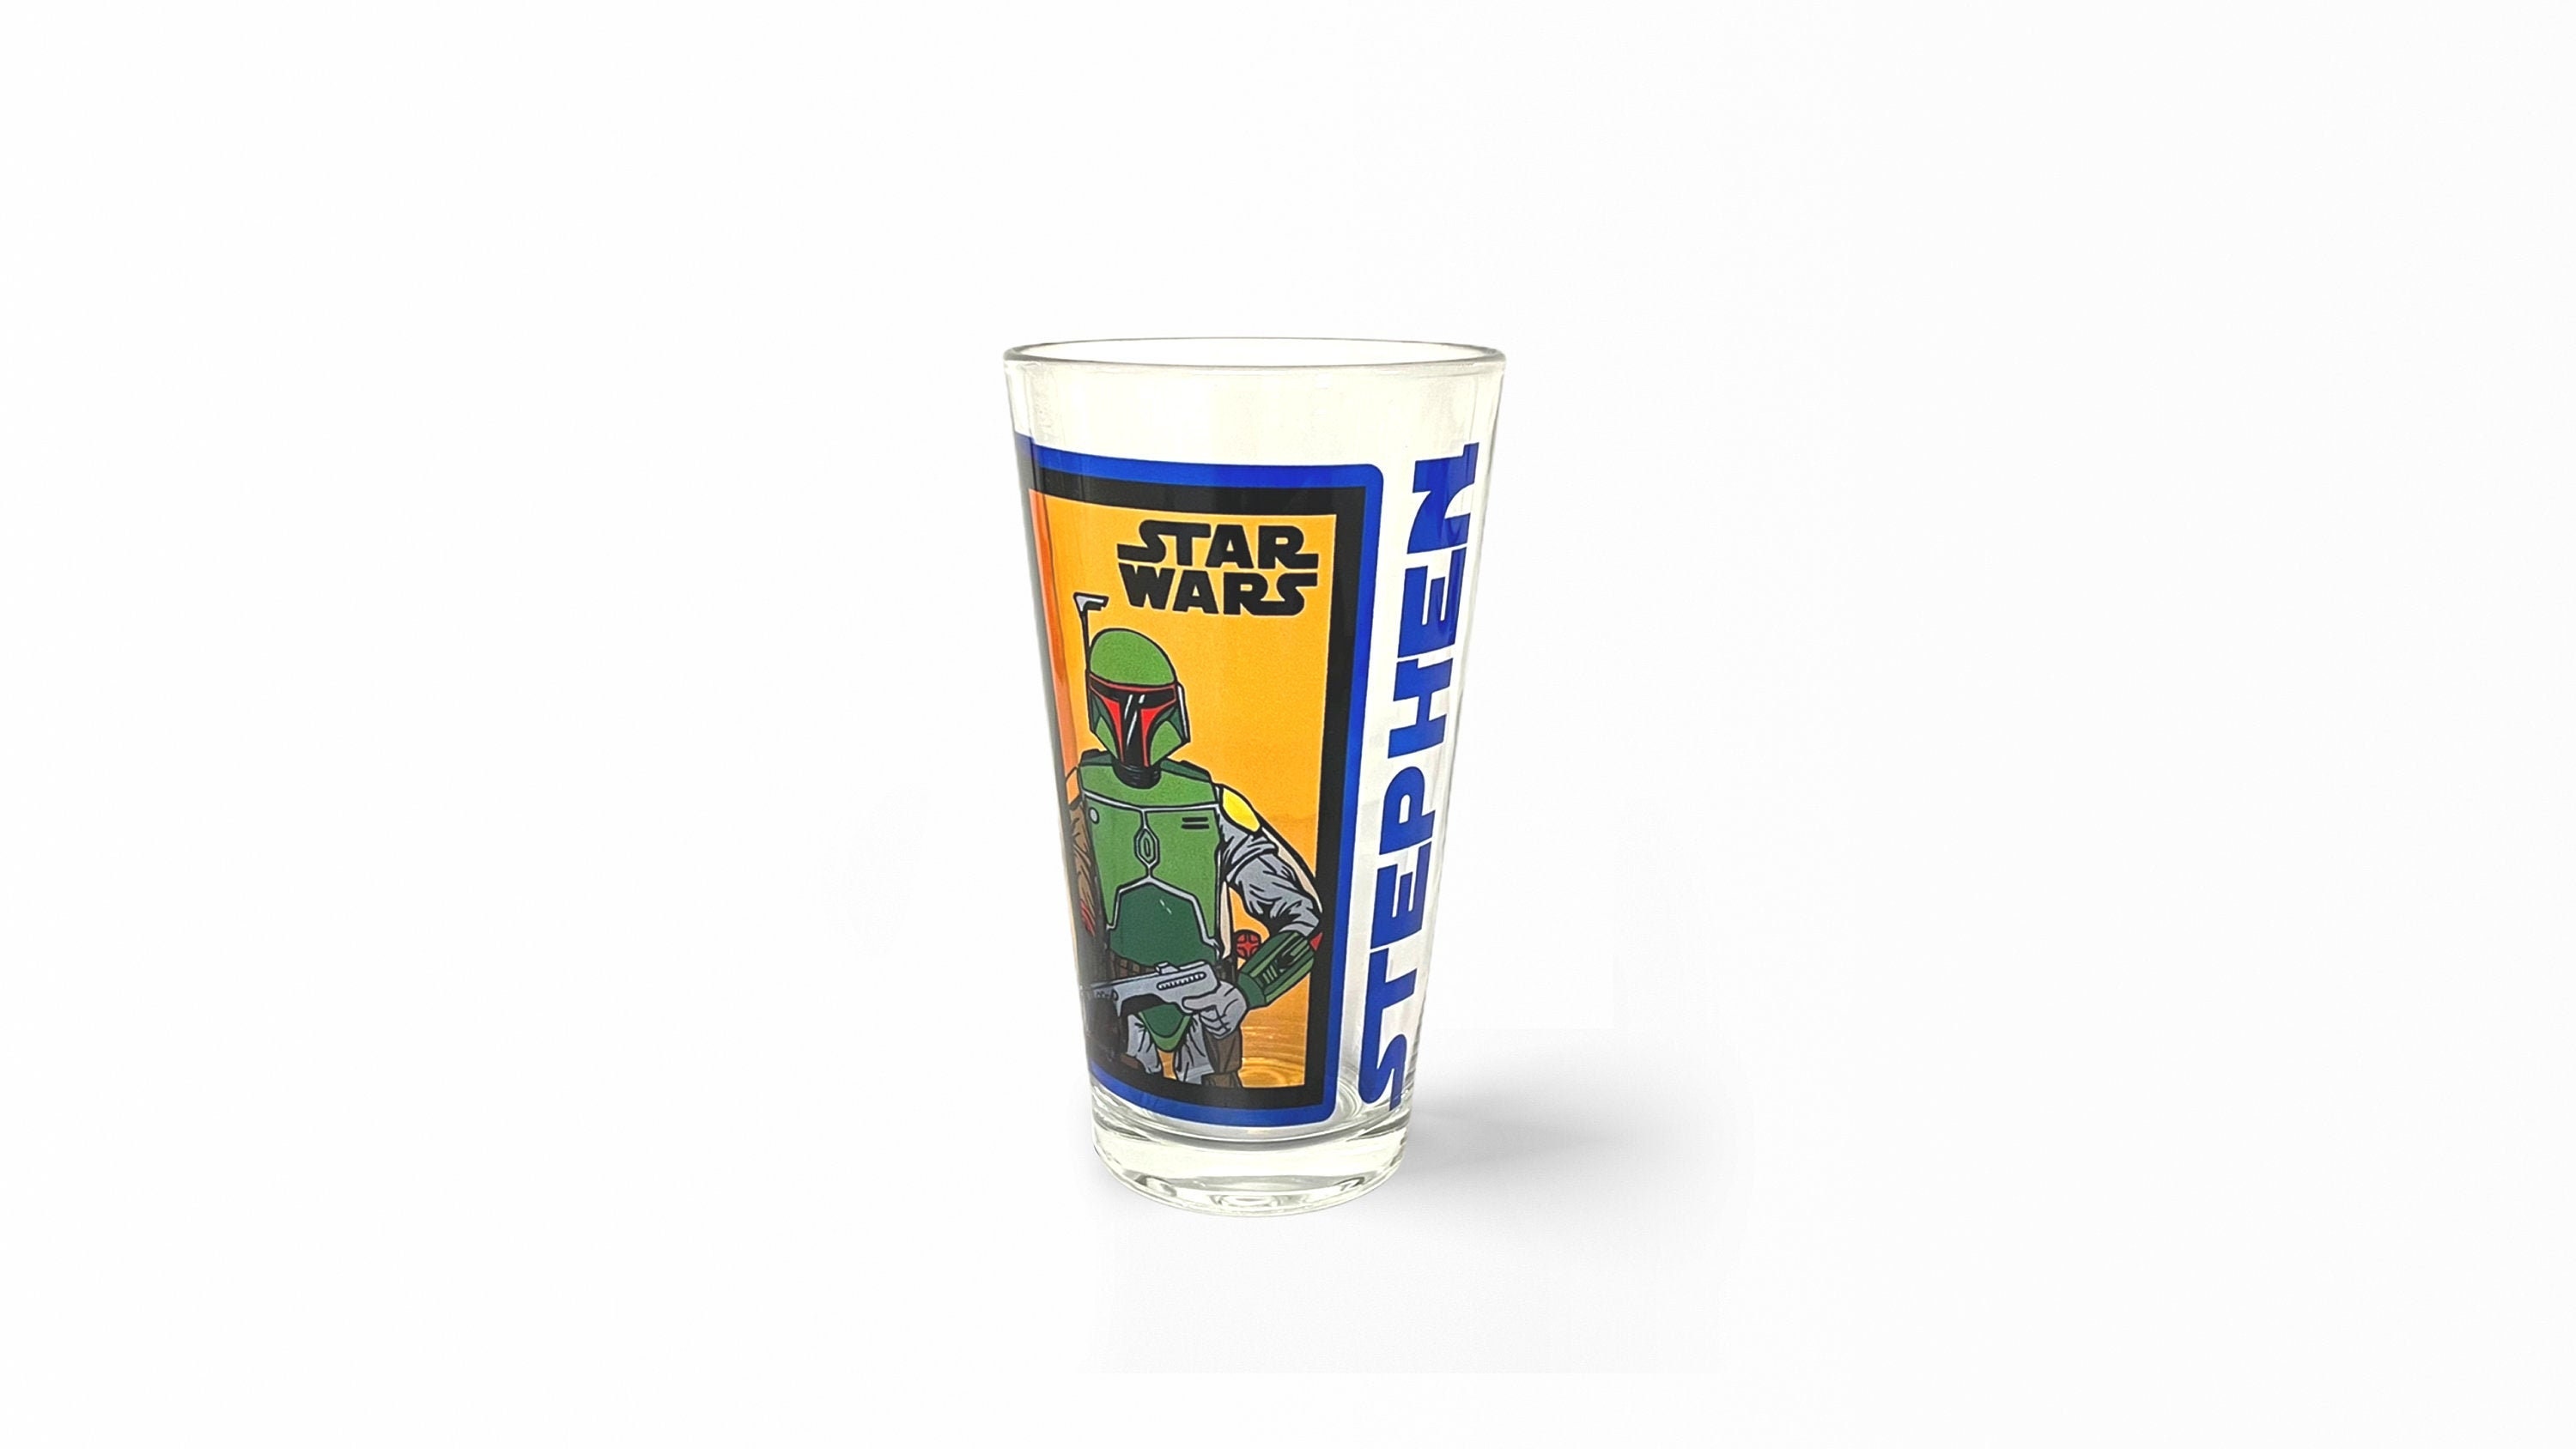 Star Wars Rogue One Pint Glass Tumbler - Officially Licensed (5-3/4 Tall)